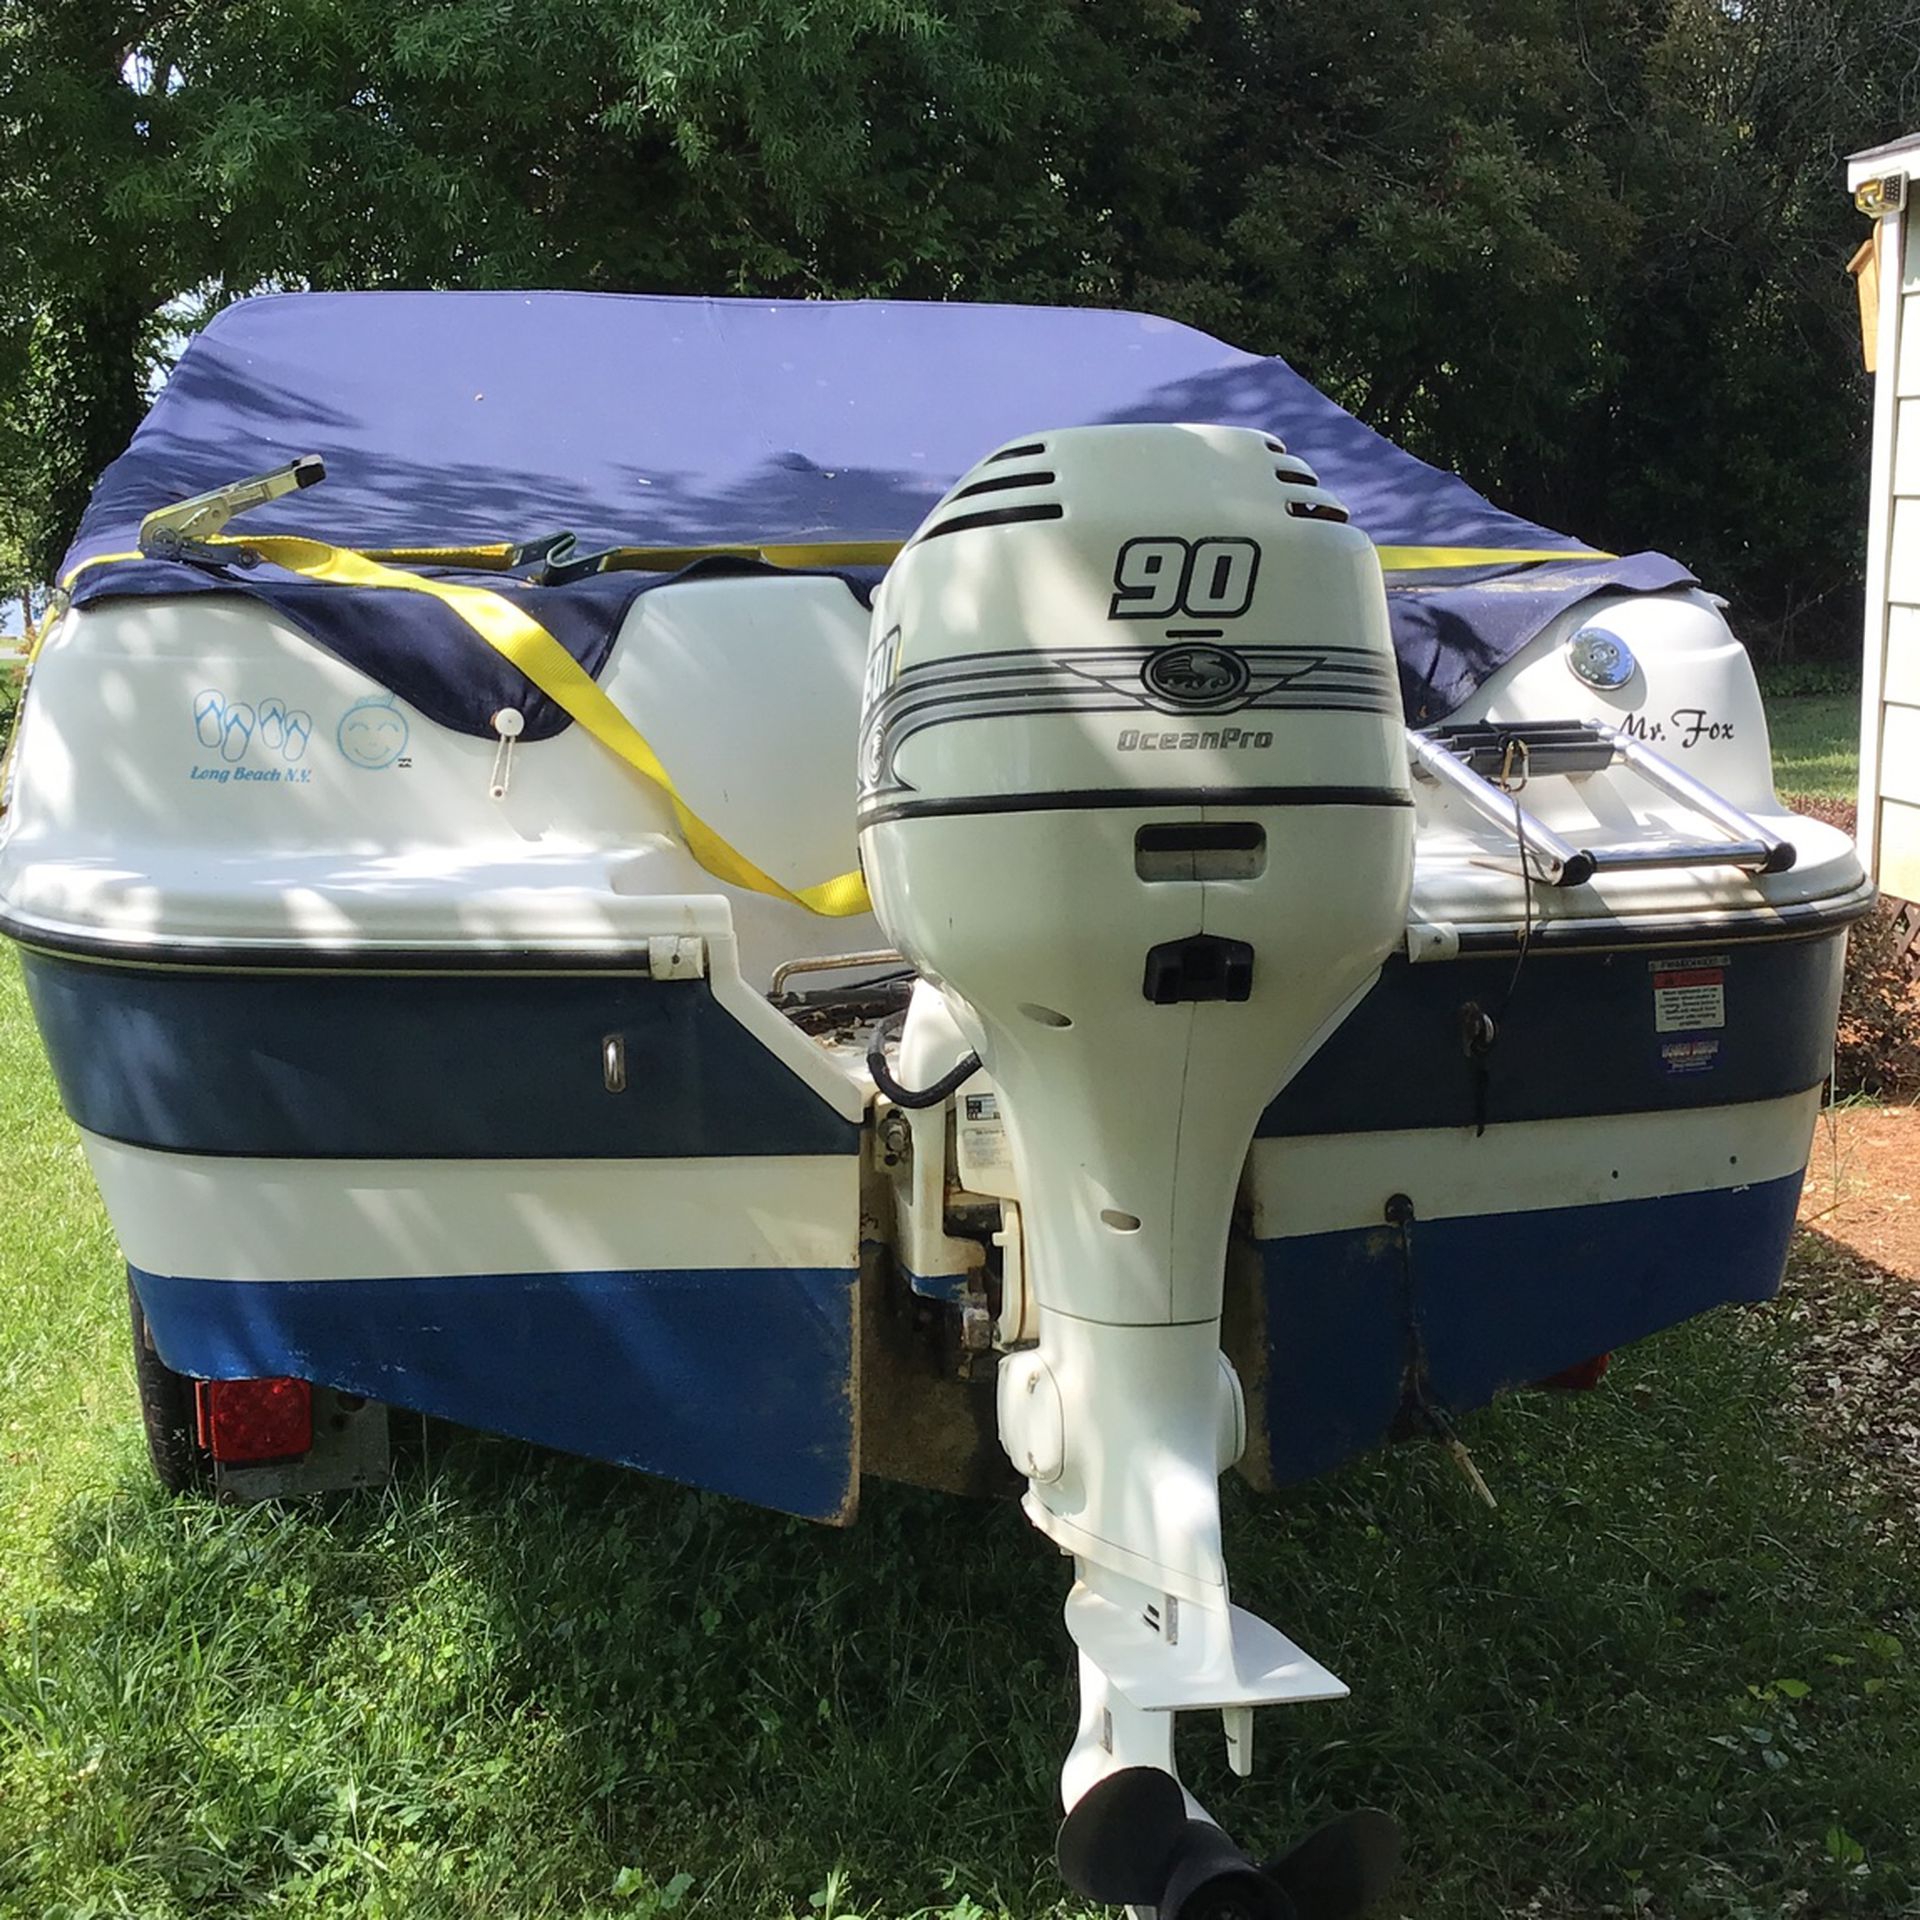 2011 Horizon 17 LE Four Winns Four Wins17 ft Bowrider 90 hp Johnson 2stroke  comes with Anchor, lines, safety equipment, life jackets, Bimini top, day covers. Boat has been garaged since new except this year. Trailer included( no papers). Selling because getting to old for boating)